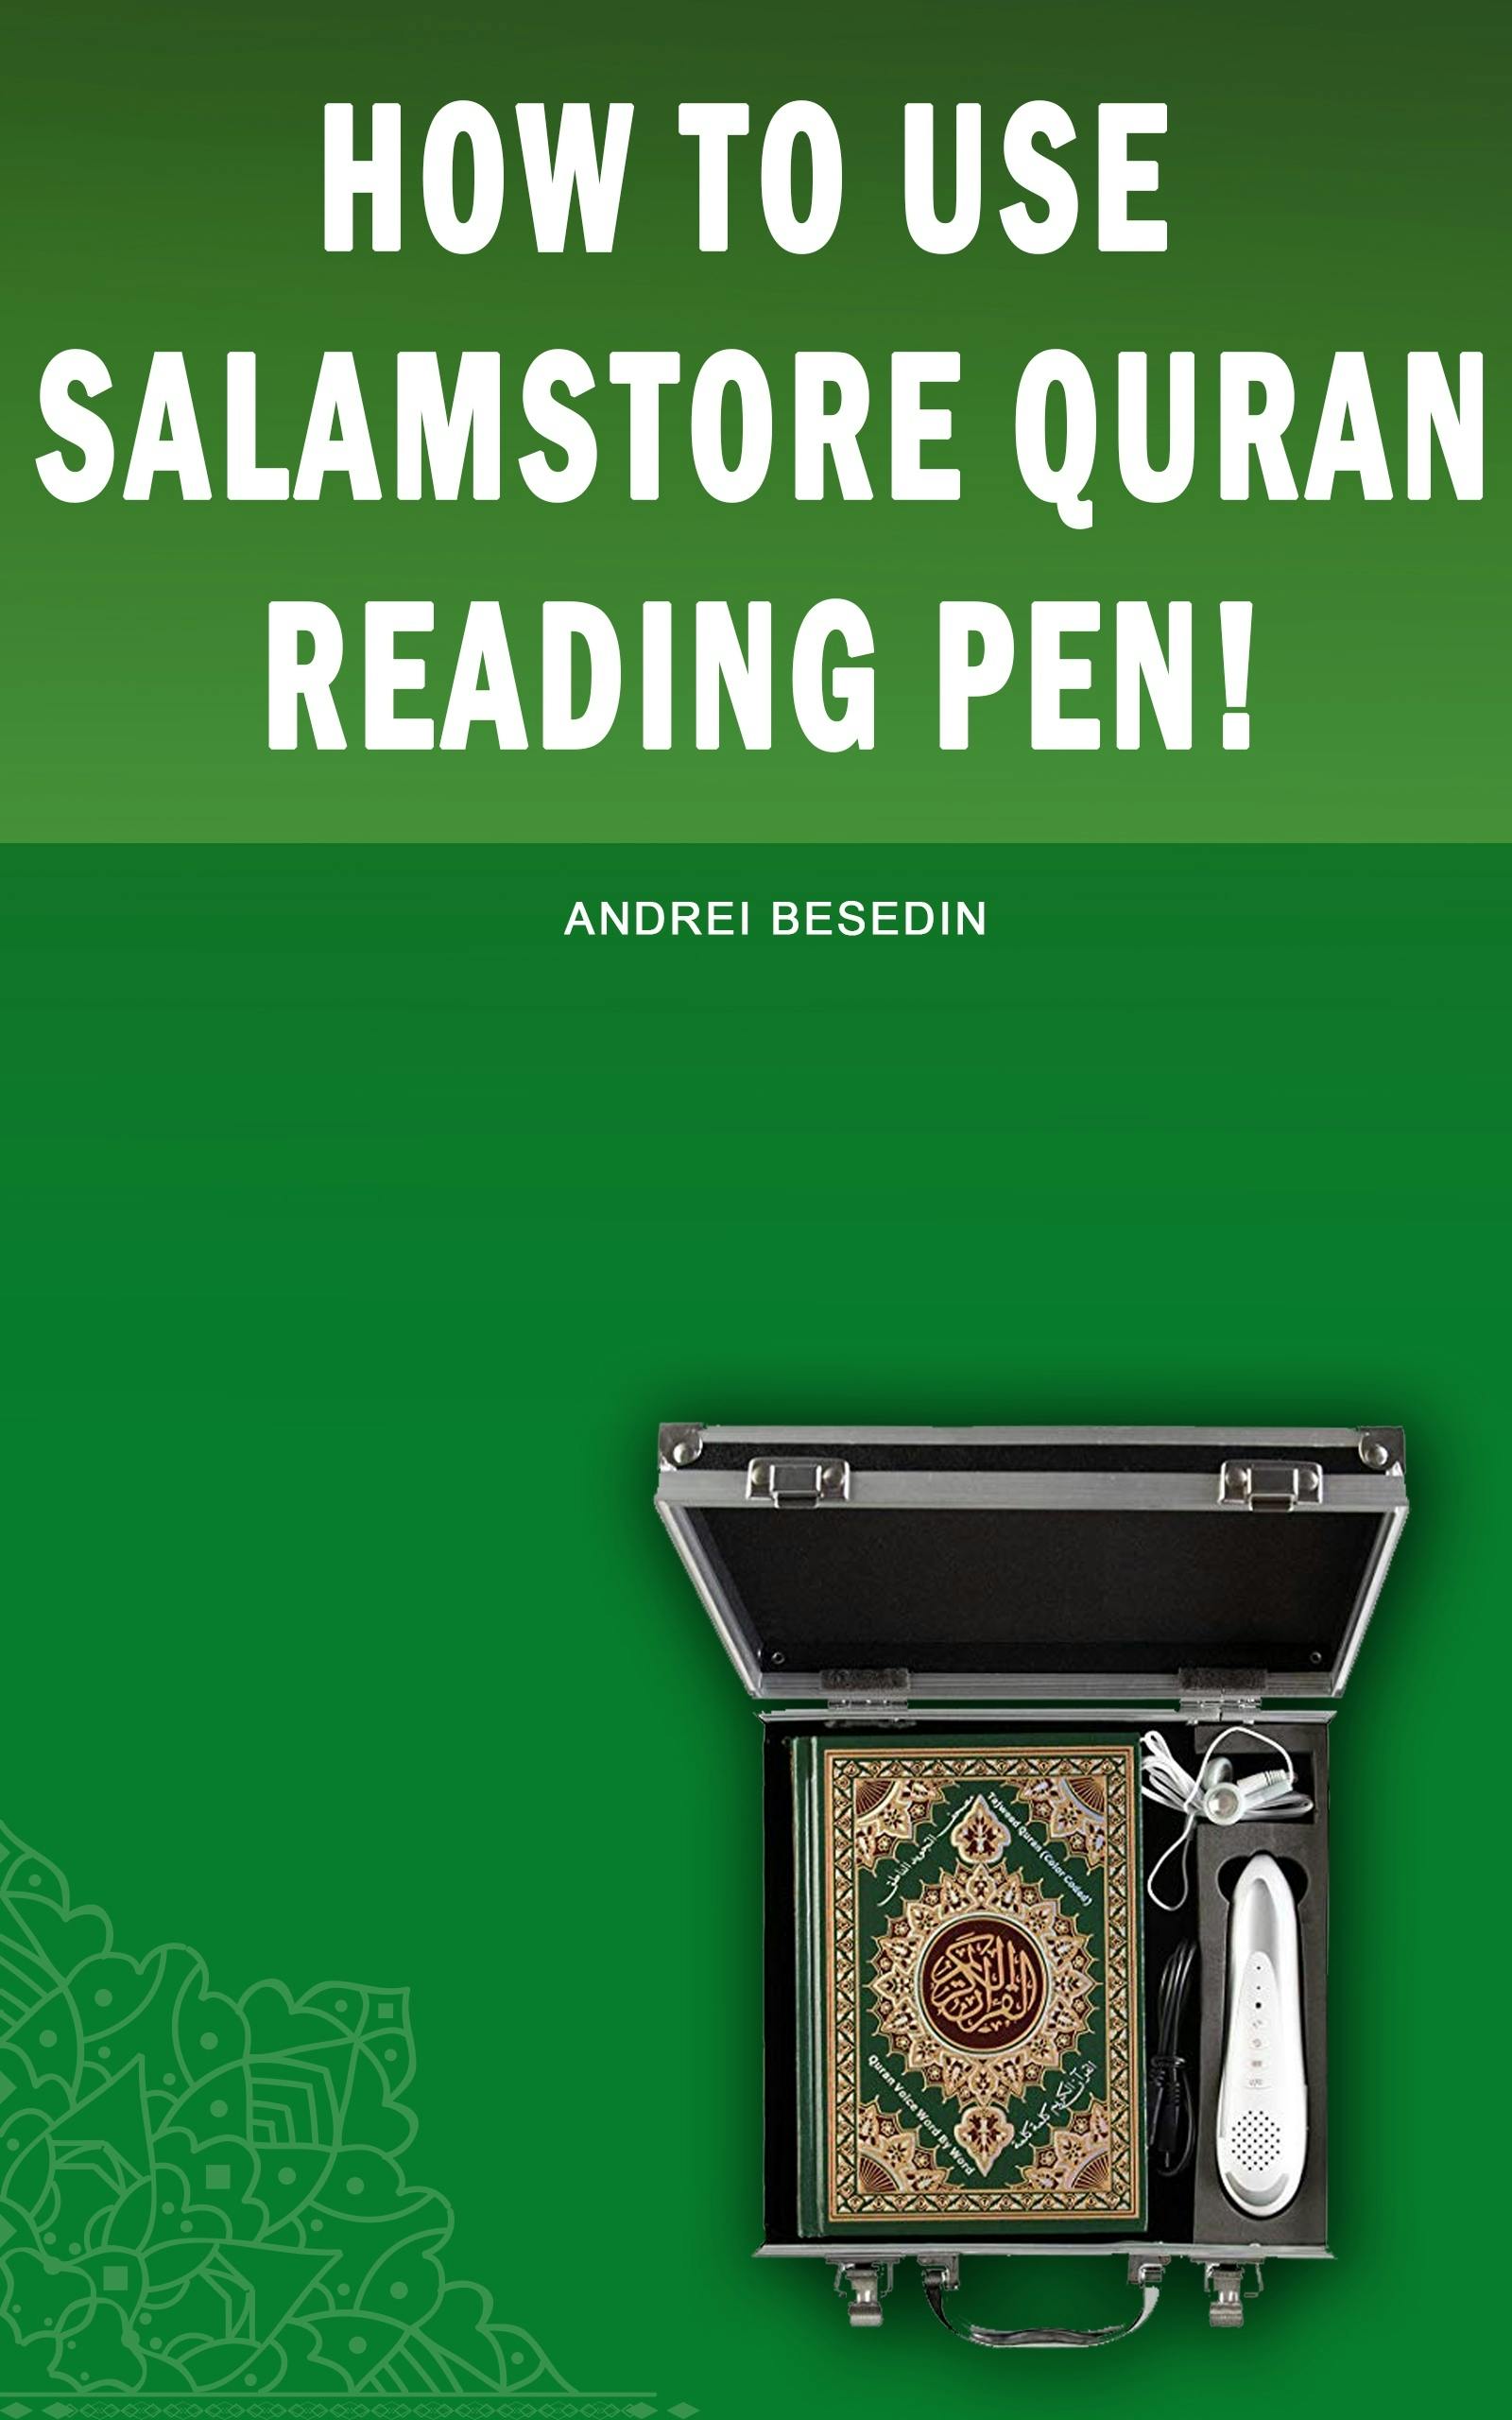 How To Use Salamstore Quran Reading Pen! - Andrei Besedin